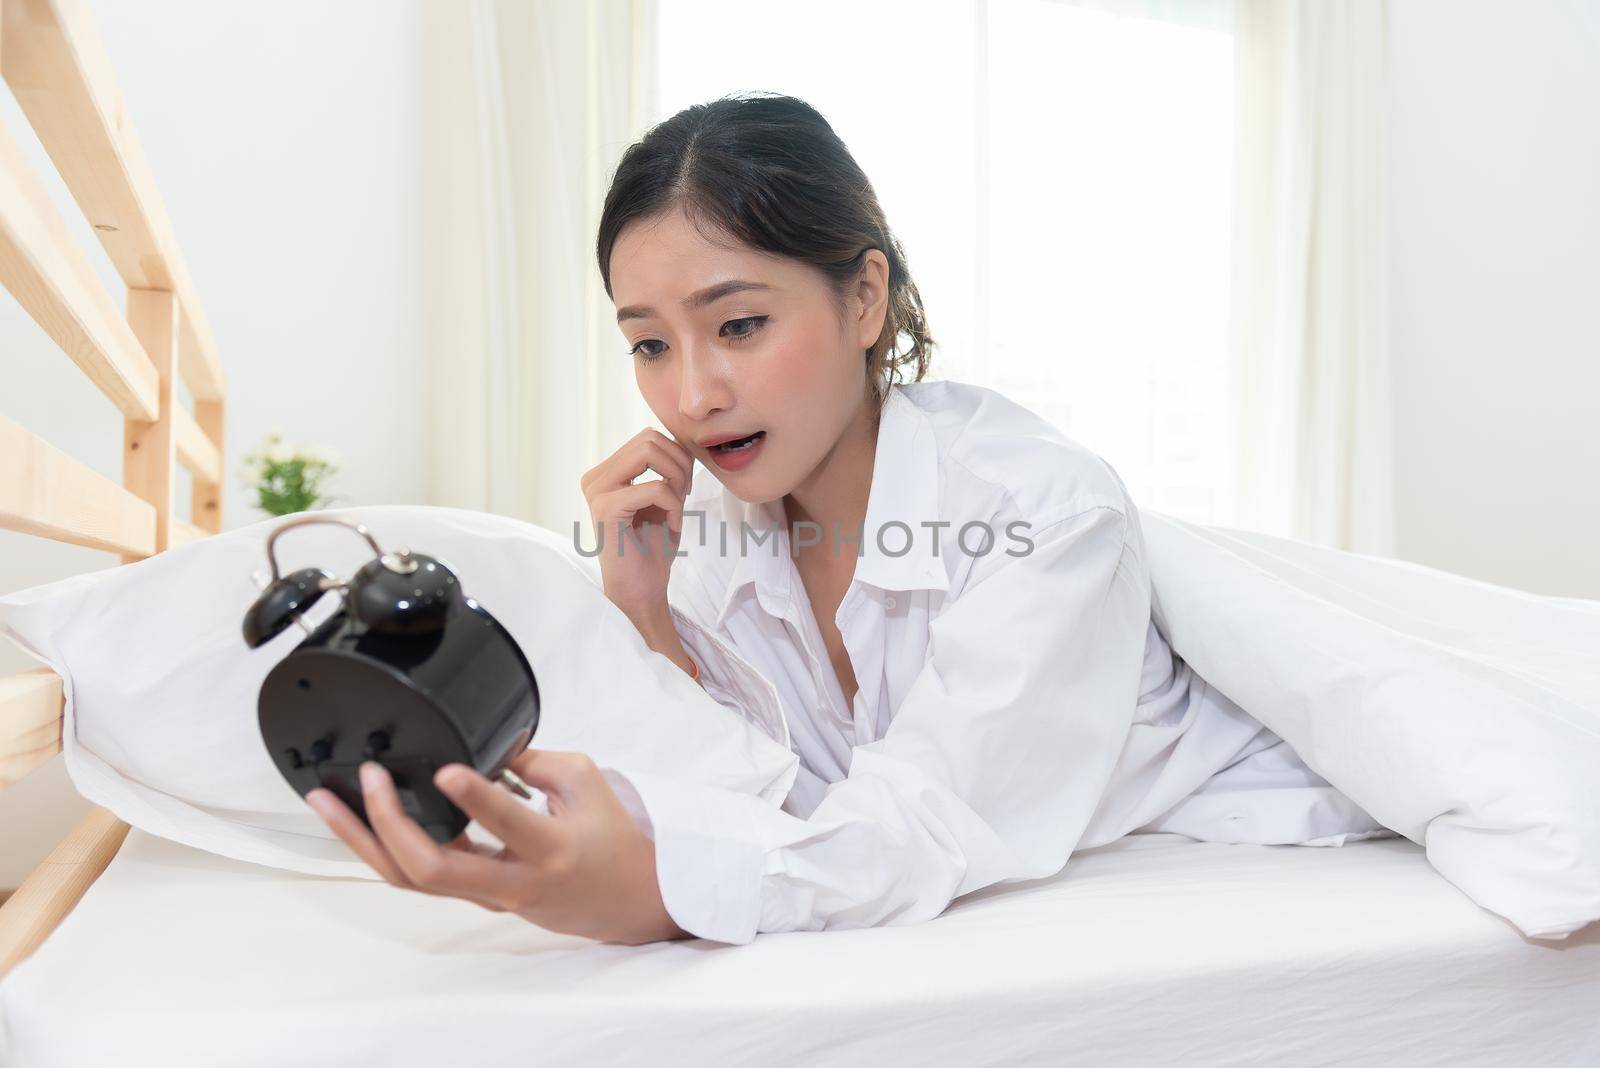 Asian woman shocked when wake up late by forget to setting alarm clock at night and having meeting appointment and working in morning today. People lazy and hurry up rush hour concept. Shocked agape